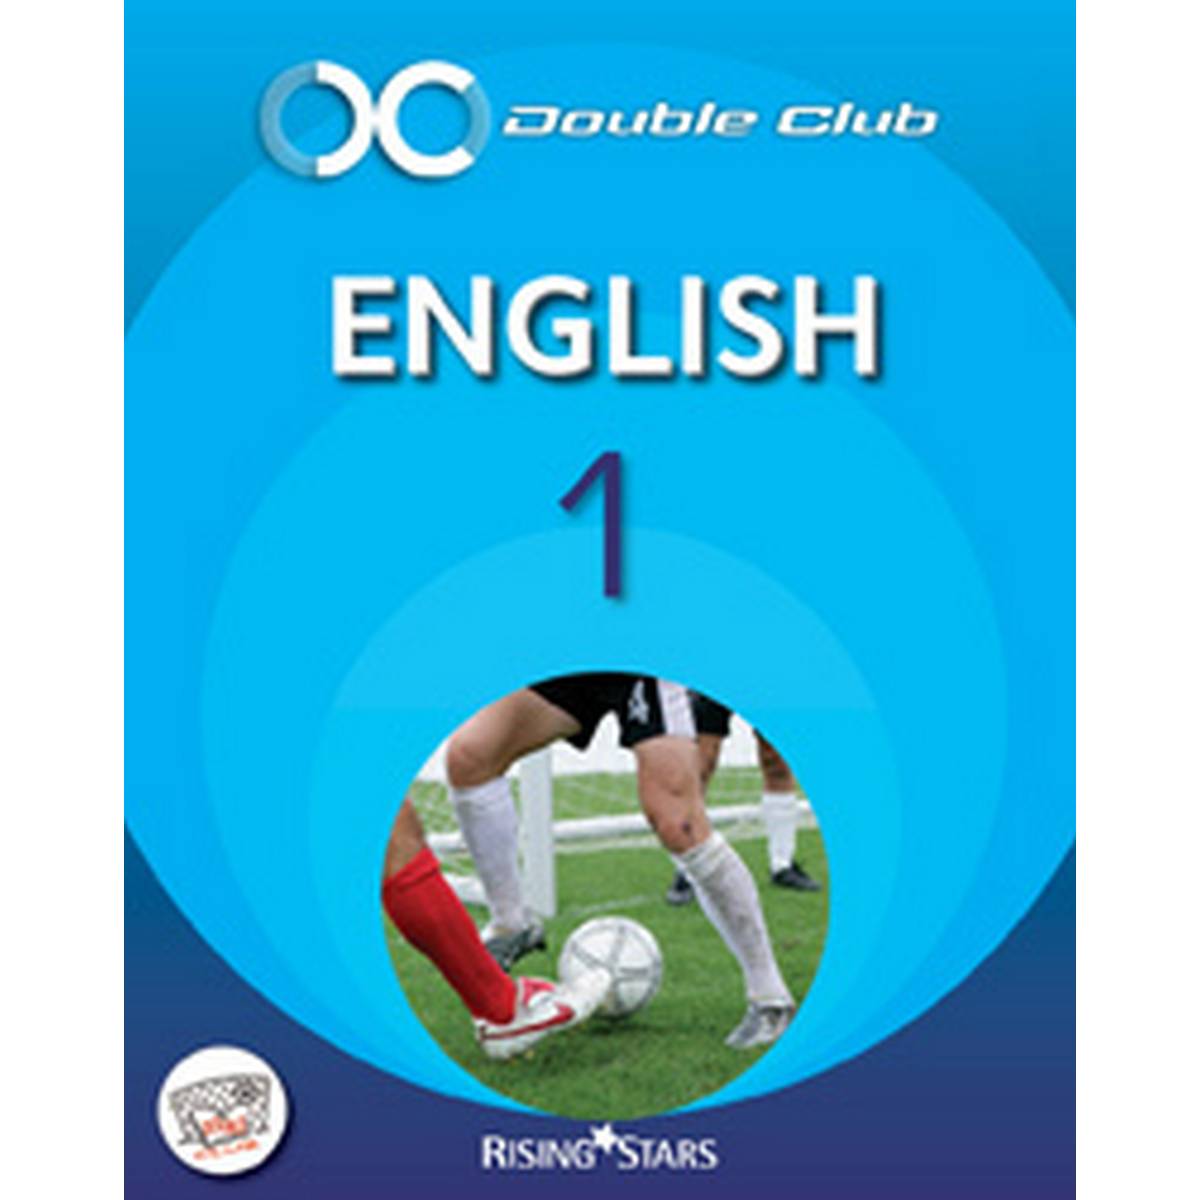 Double Club English Pupil Book 1